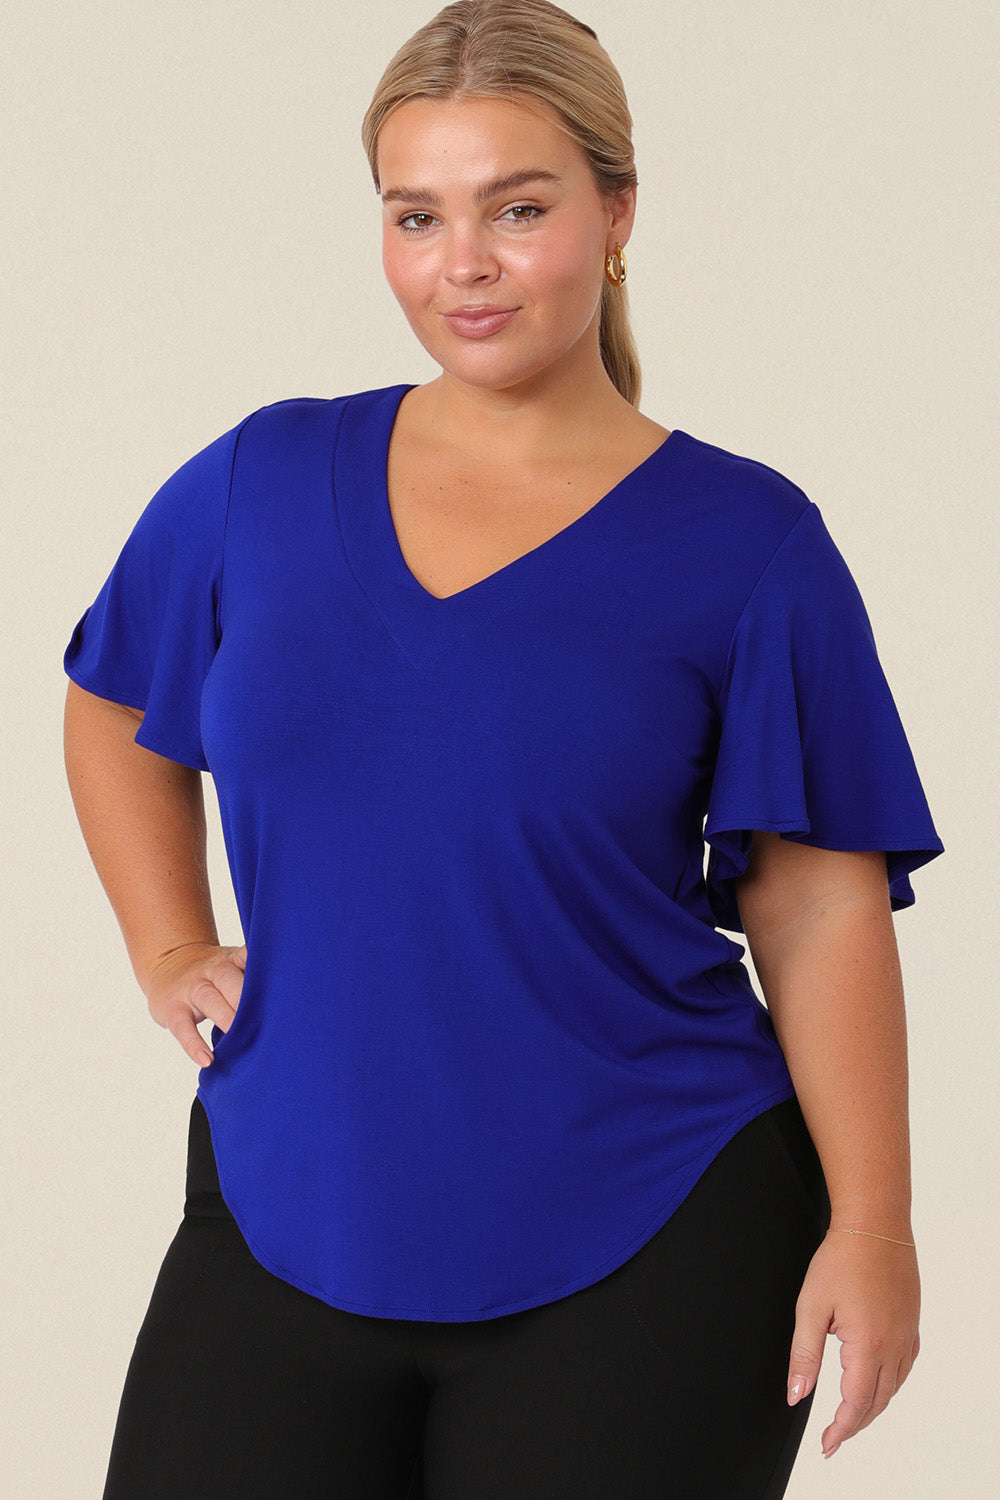 A plus size, size 14 woman wears a V-neck blue top with short flutter sleeves. Made from bamboo jersey, this is a natural fibre top that is lightweight, breathable and sustainable.